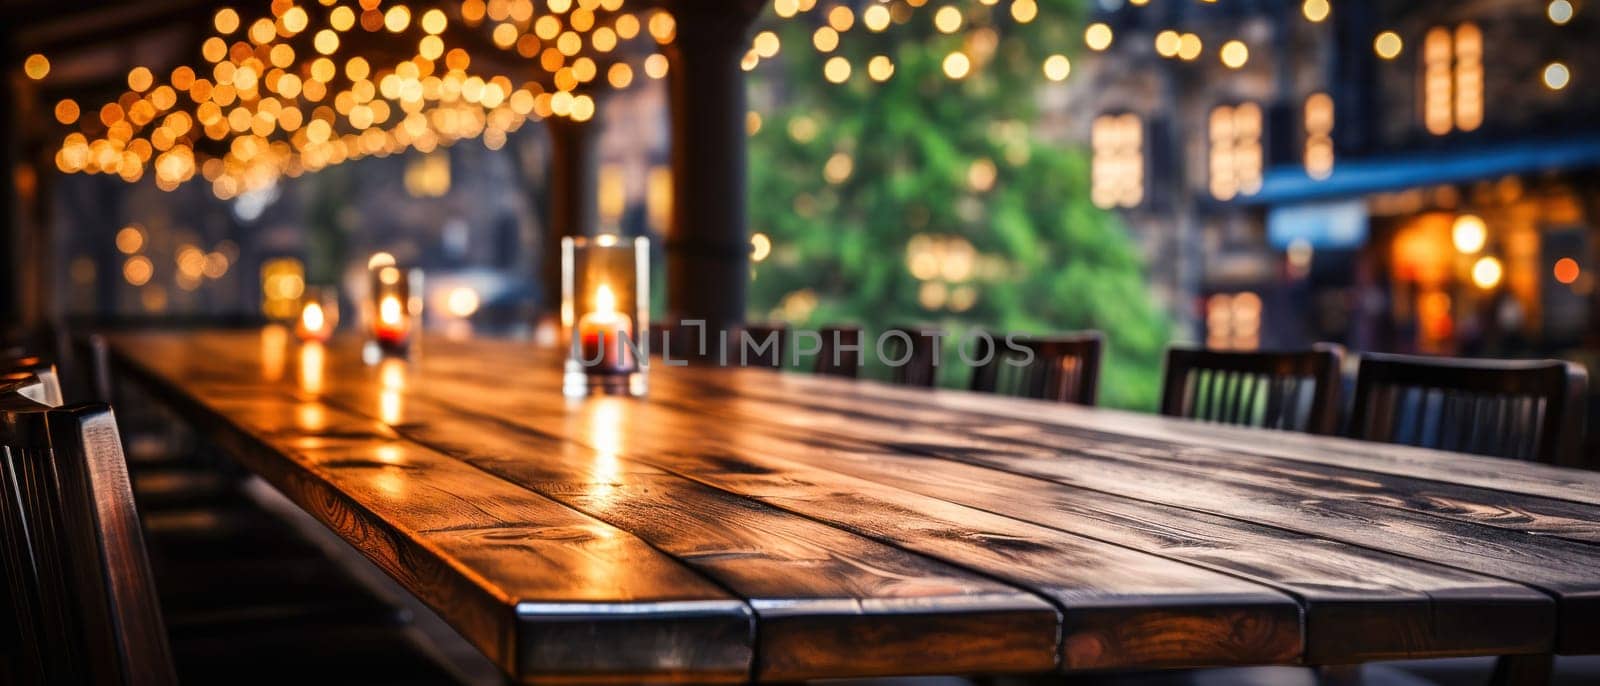 Wooden table against the background of festive lights: coziness and atmosphere of warmth and joy by Yurich32